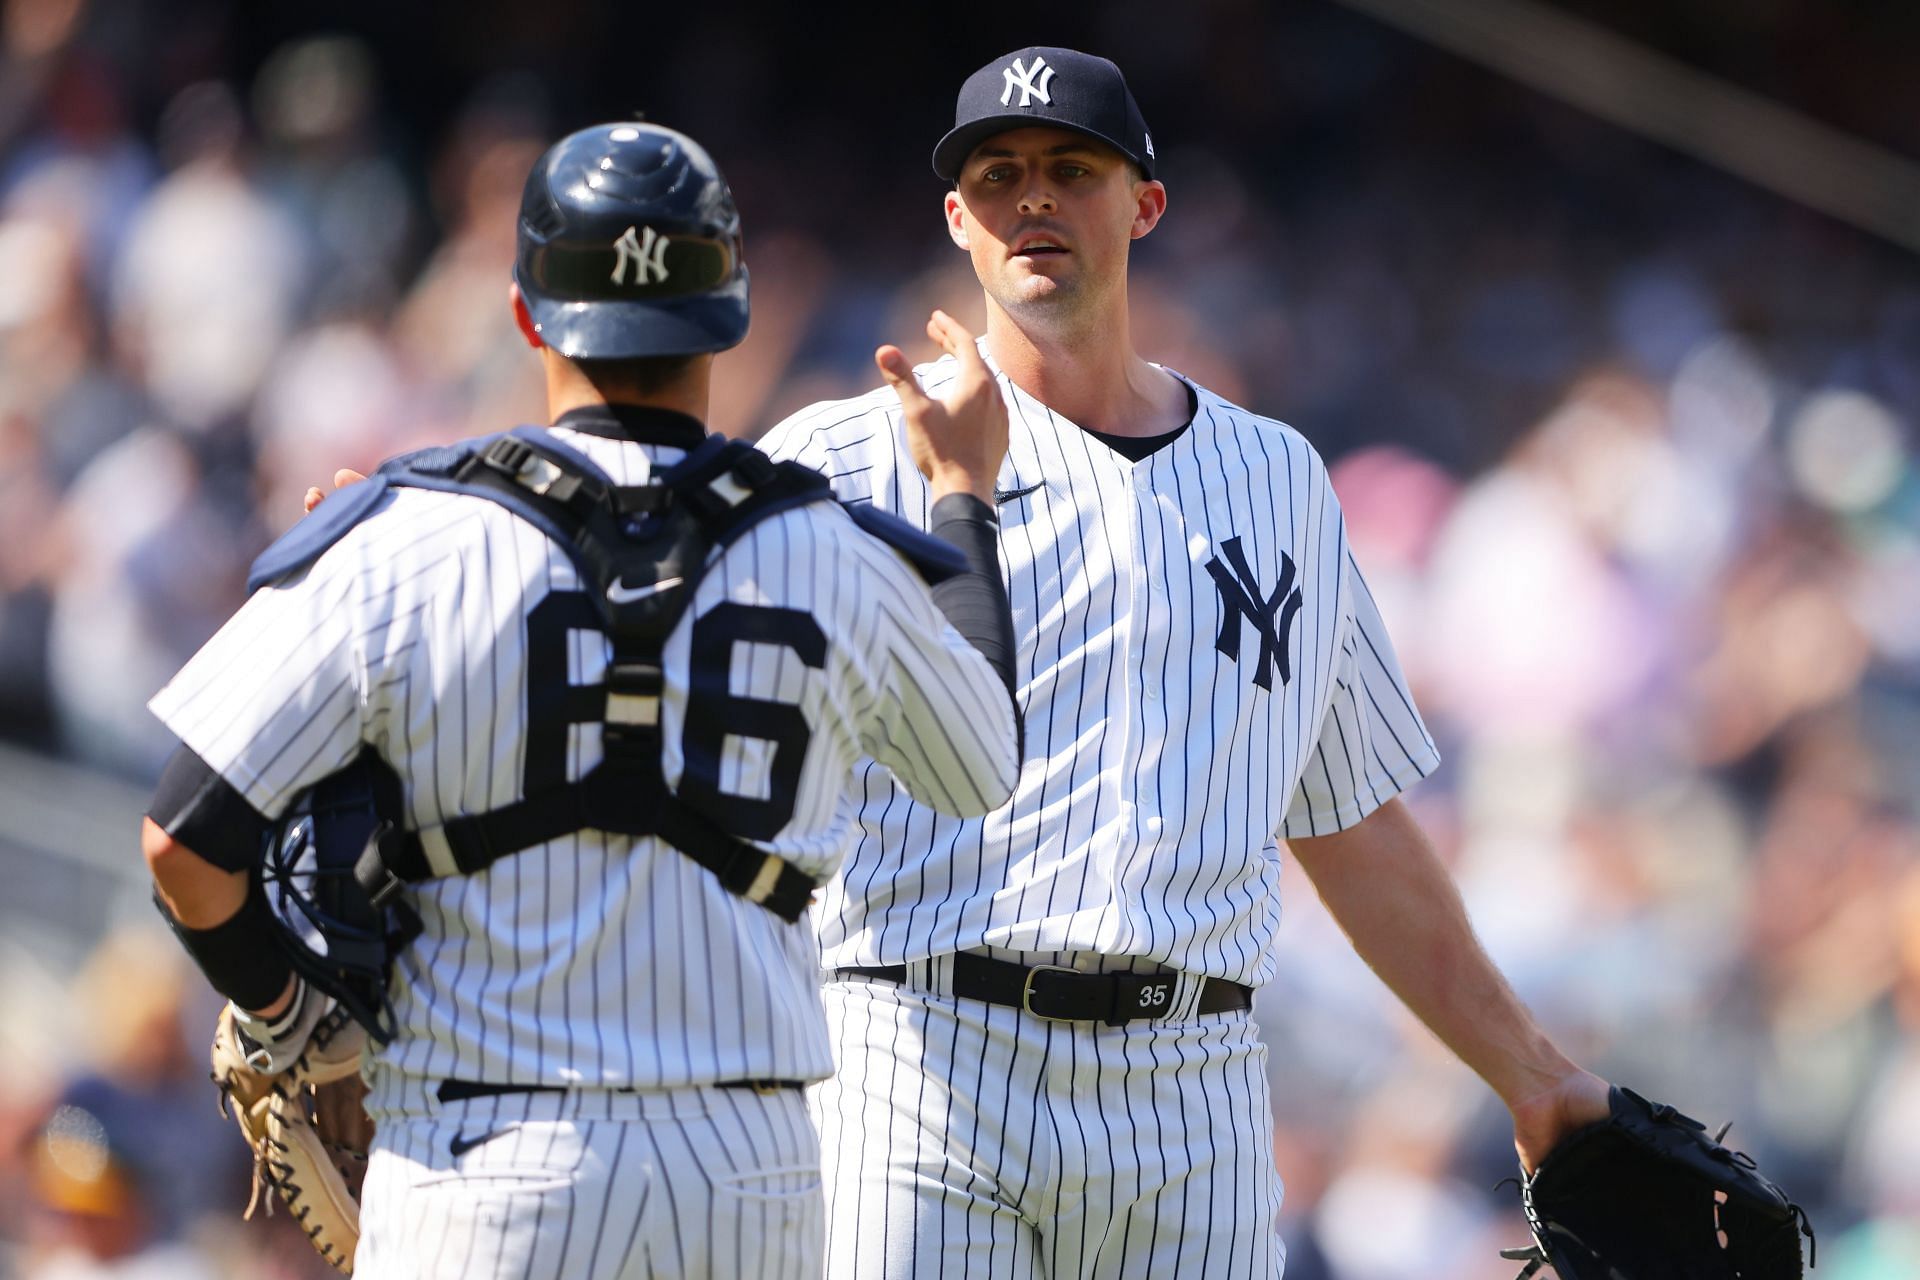 Yankees reliever Clay Holmes tu mlb yankees roster 2020 rning his sinker  into late-inning weapon